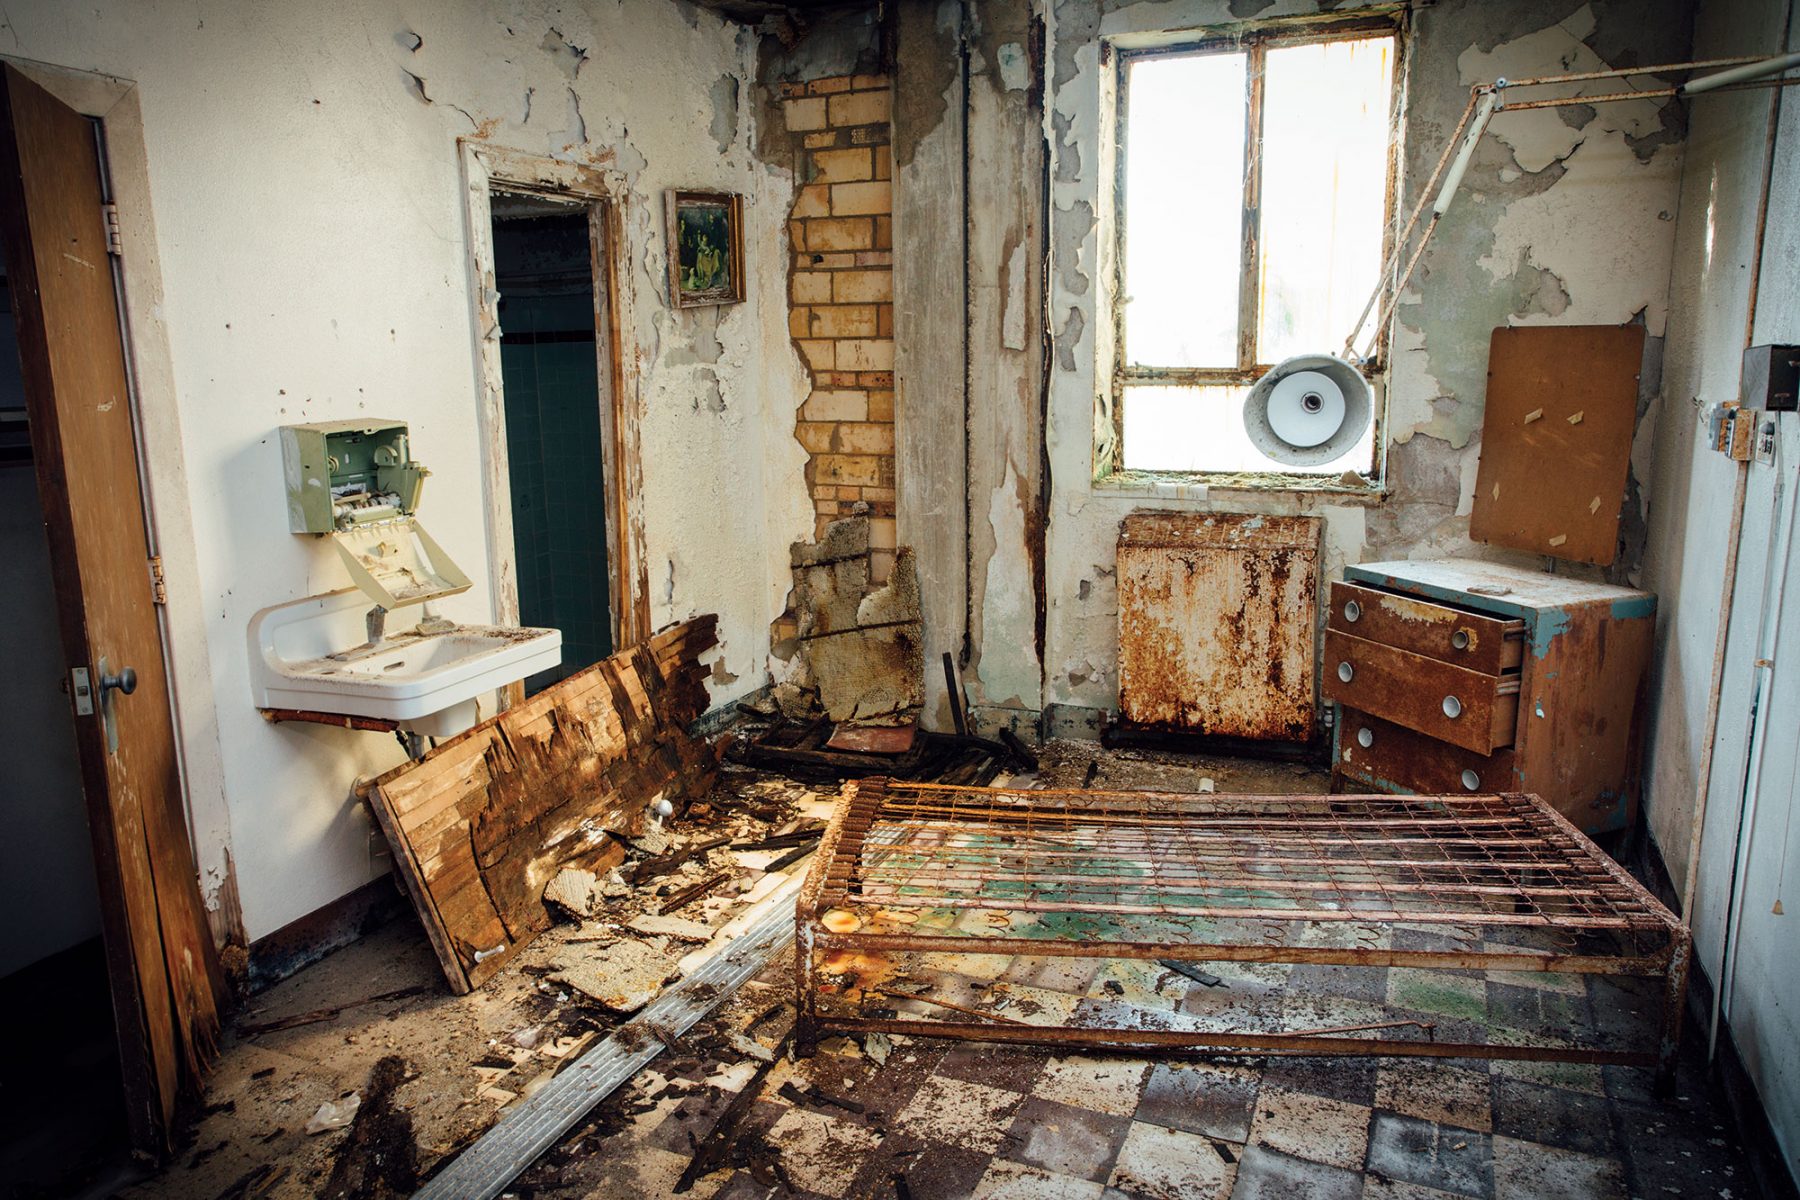 The interior of a dilapidated room with exposed brick and worn furniture showing